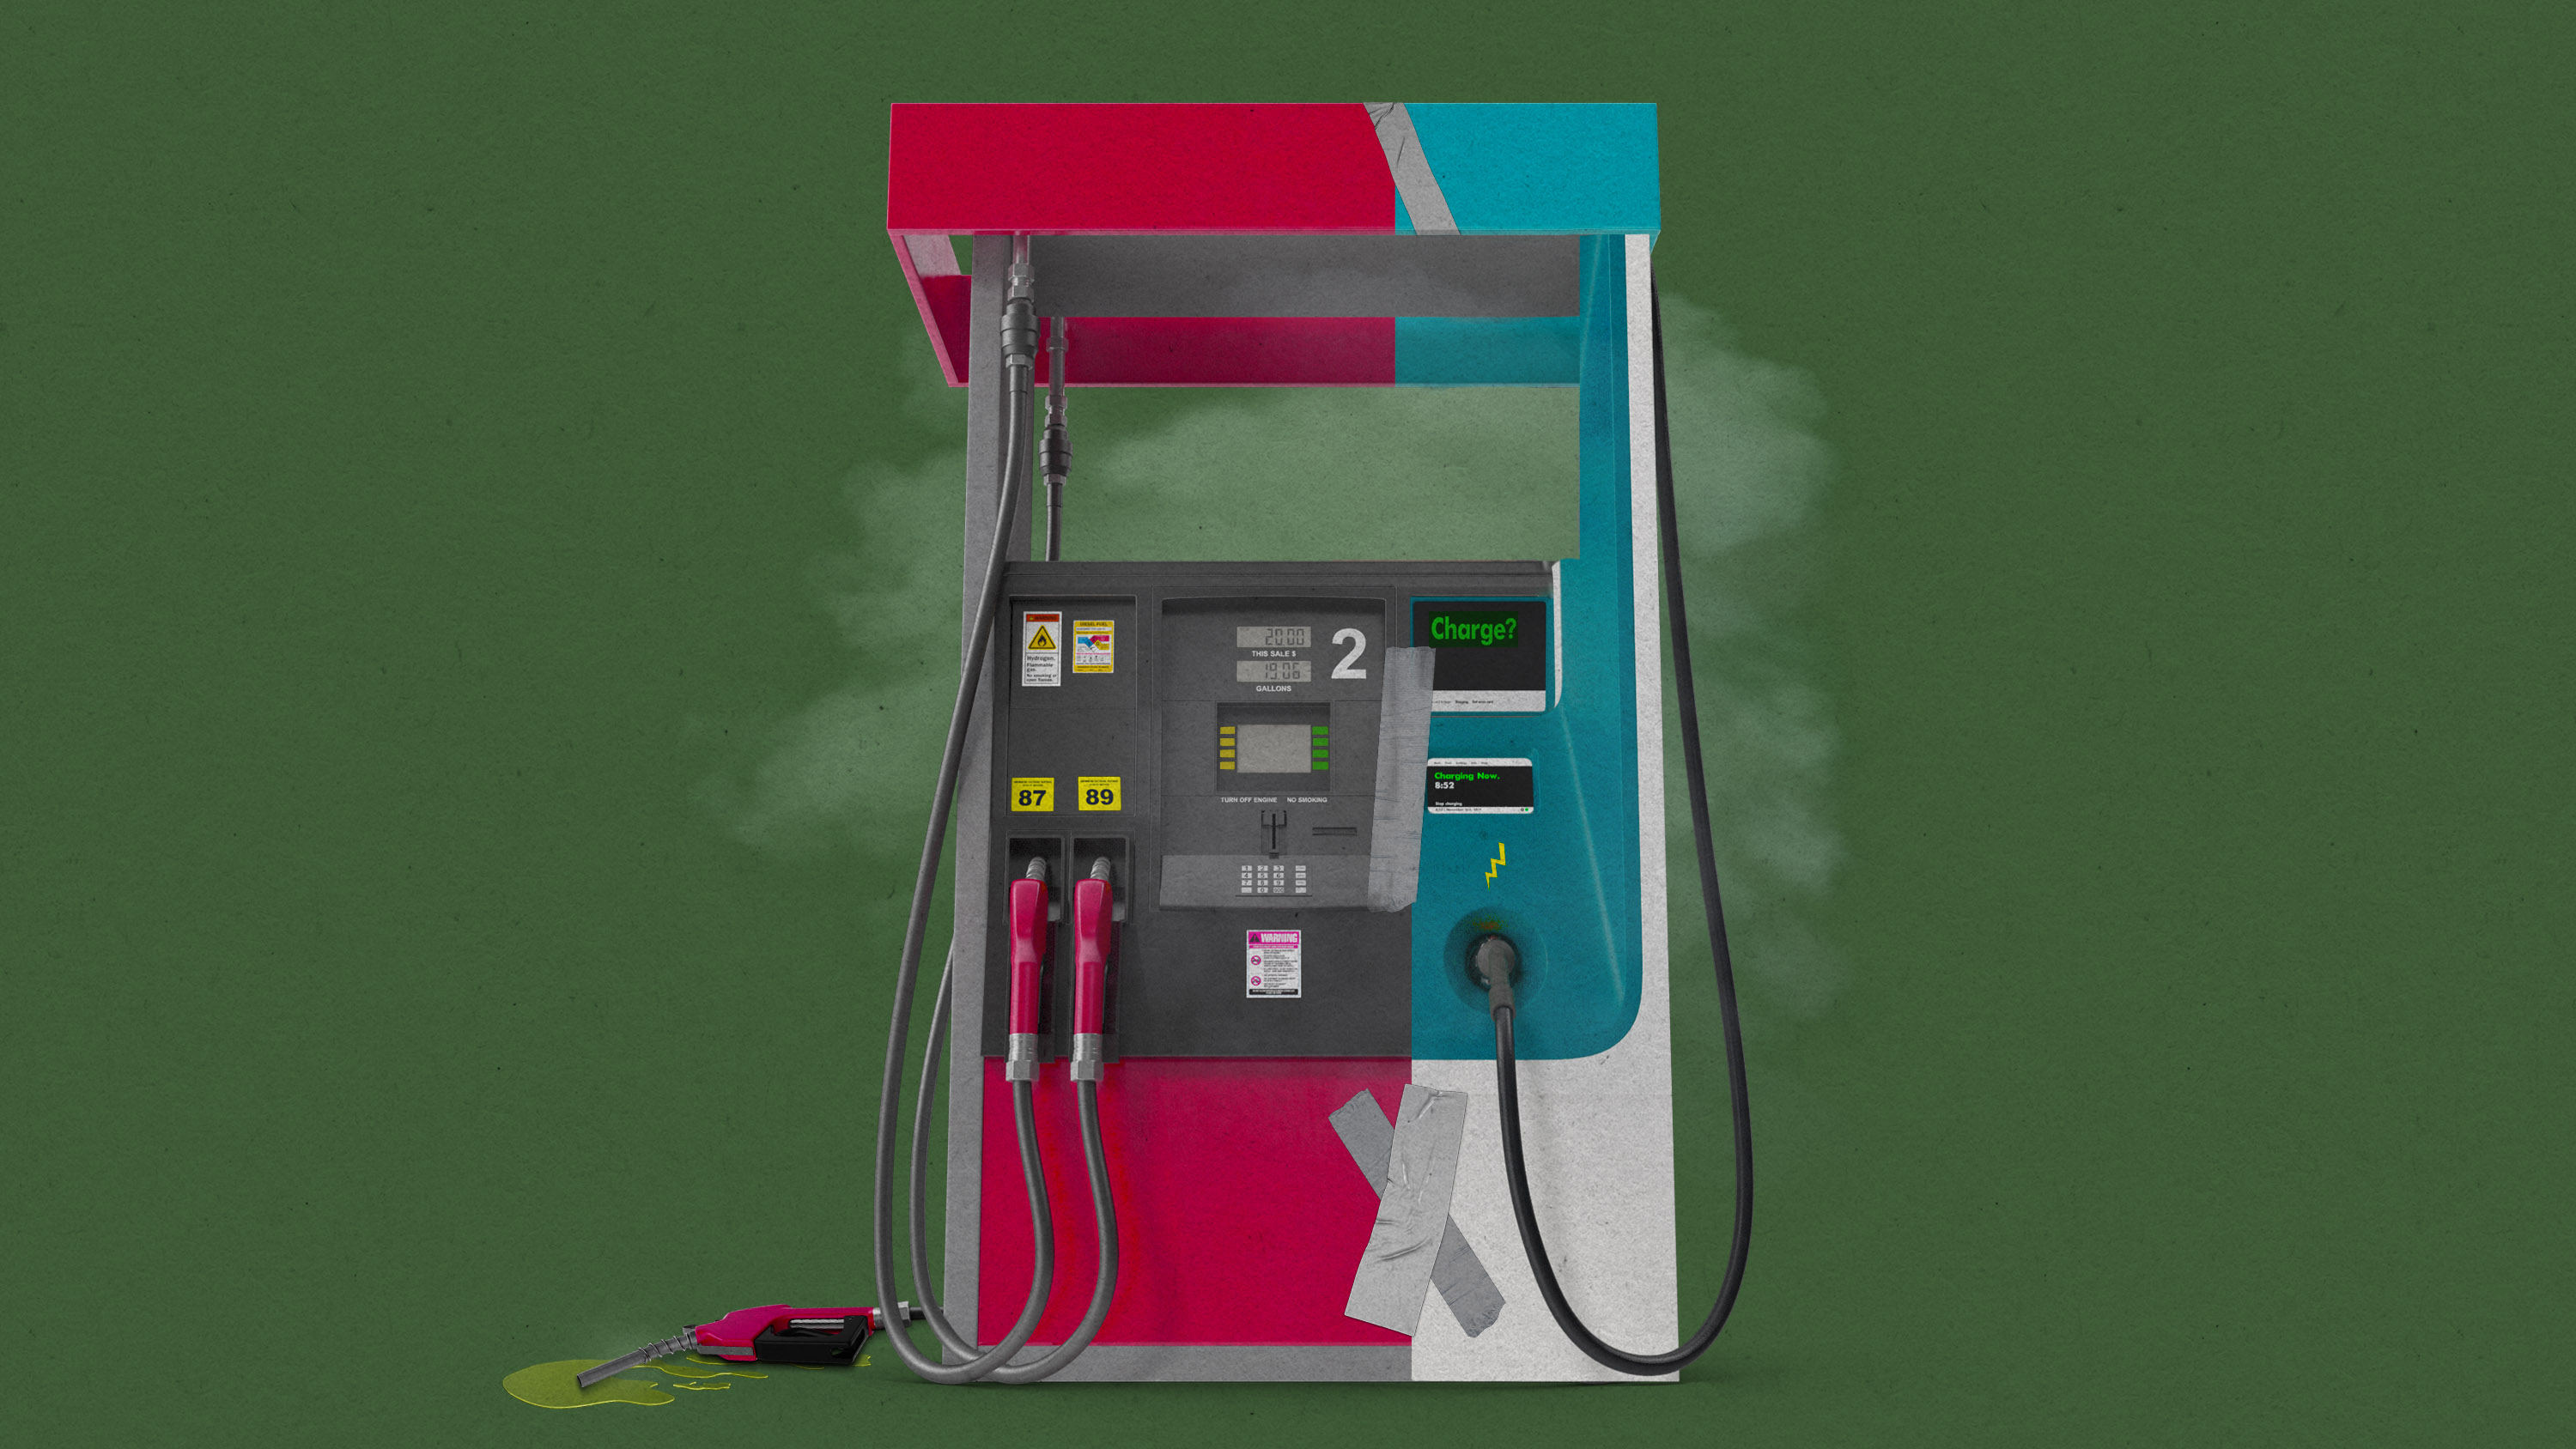 fuel pump hybrid with electric charger on the right in blue and the gasoline pumps in red on the left. A single gas nozzle is leaking onto the ground at far left, and a haze hangs around the pump.